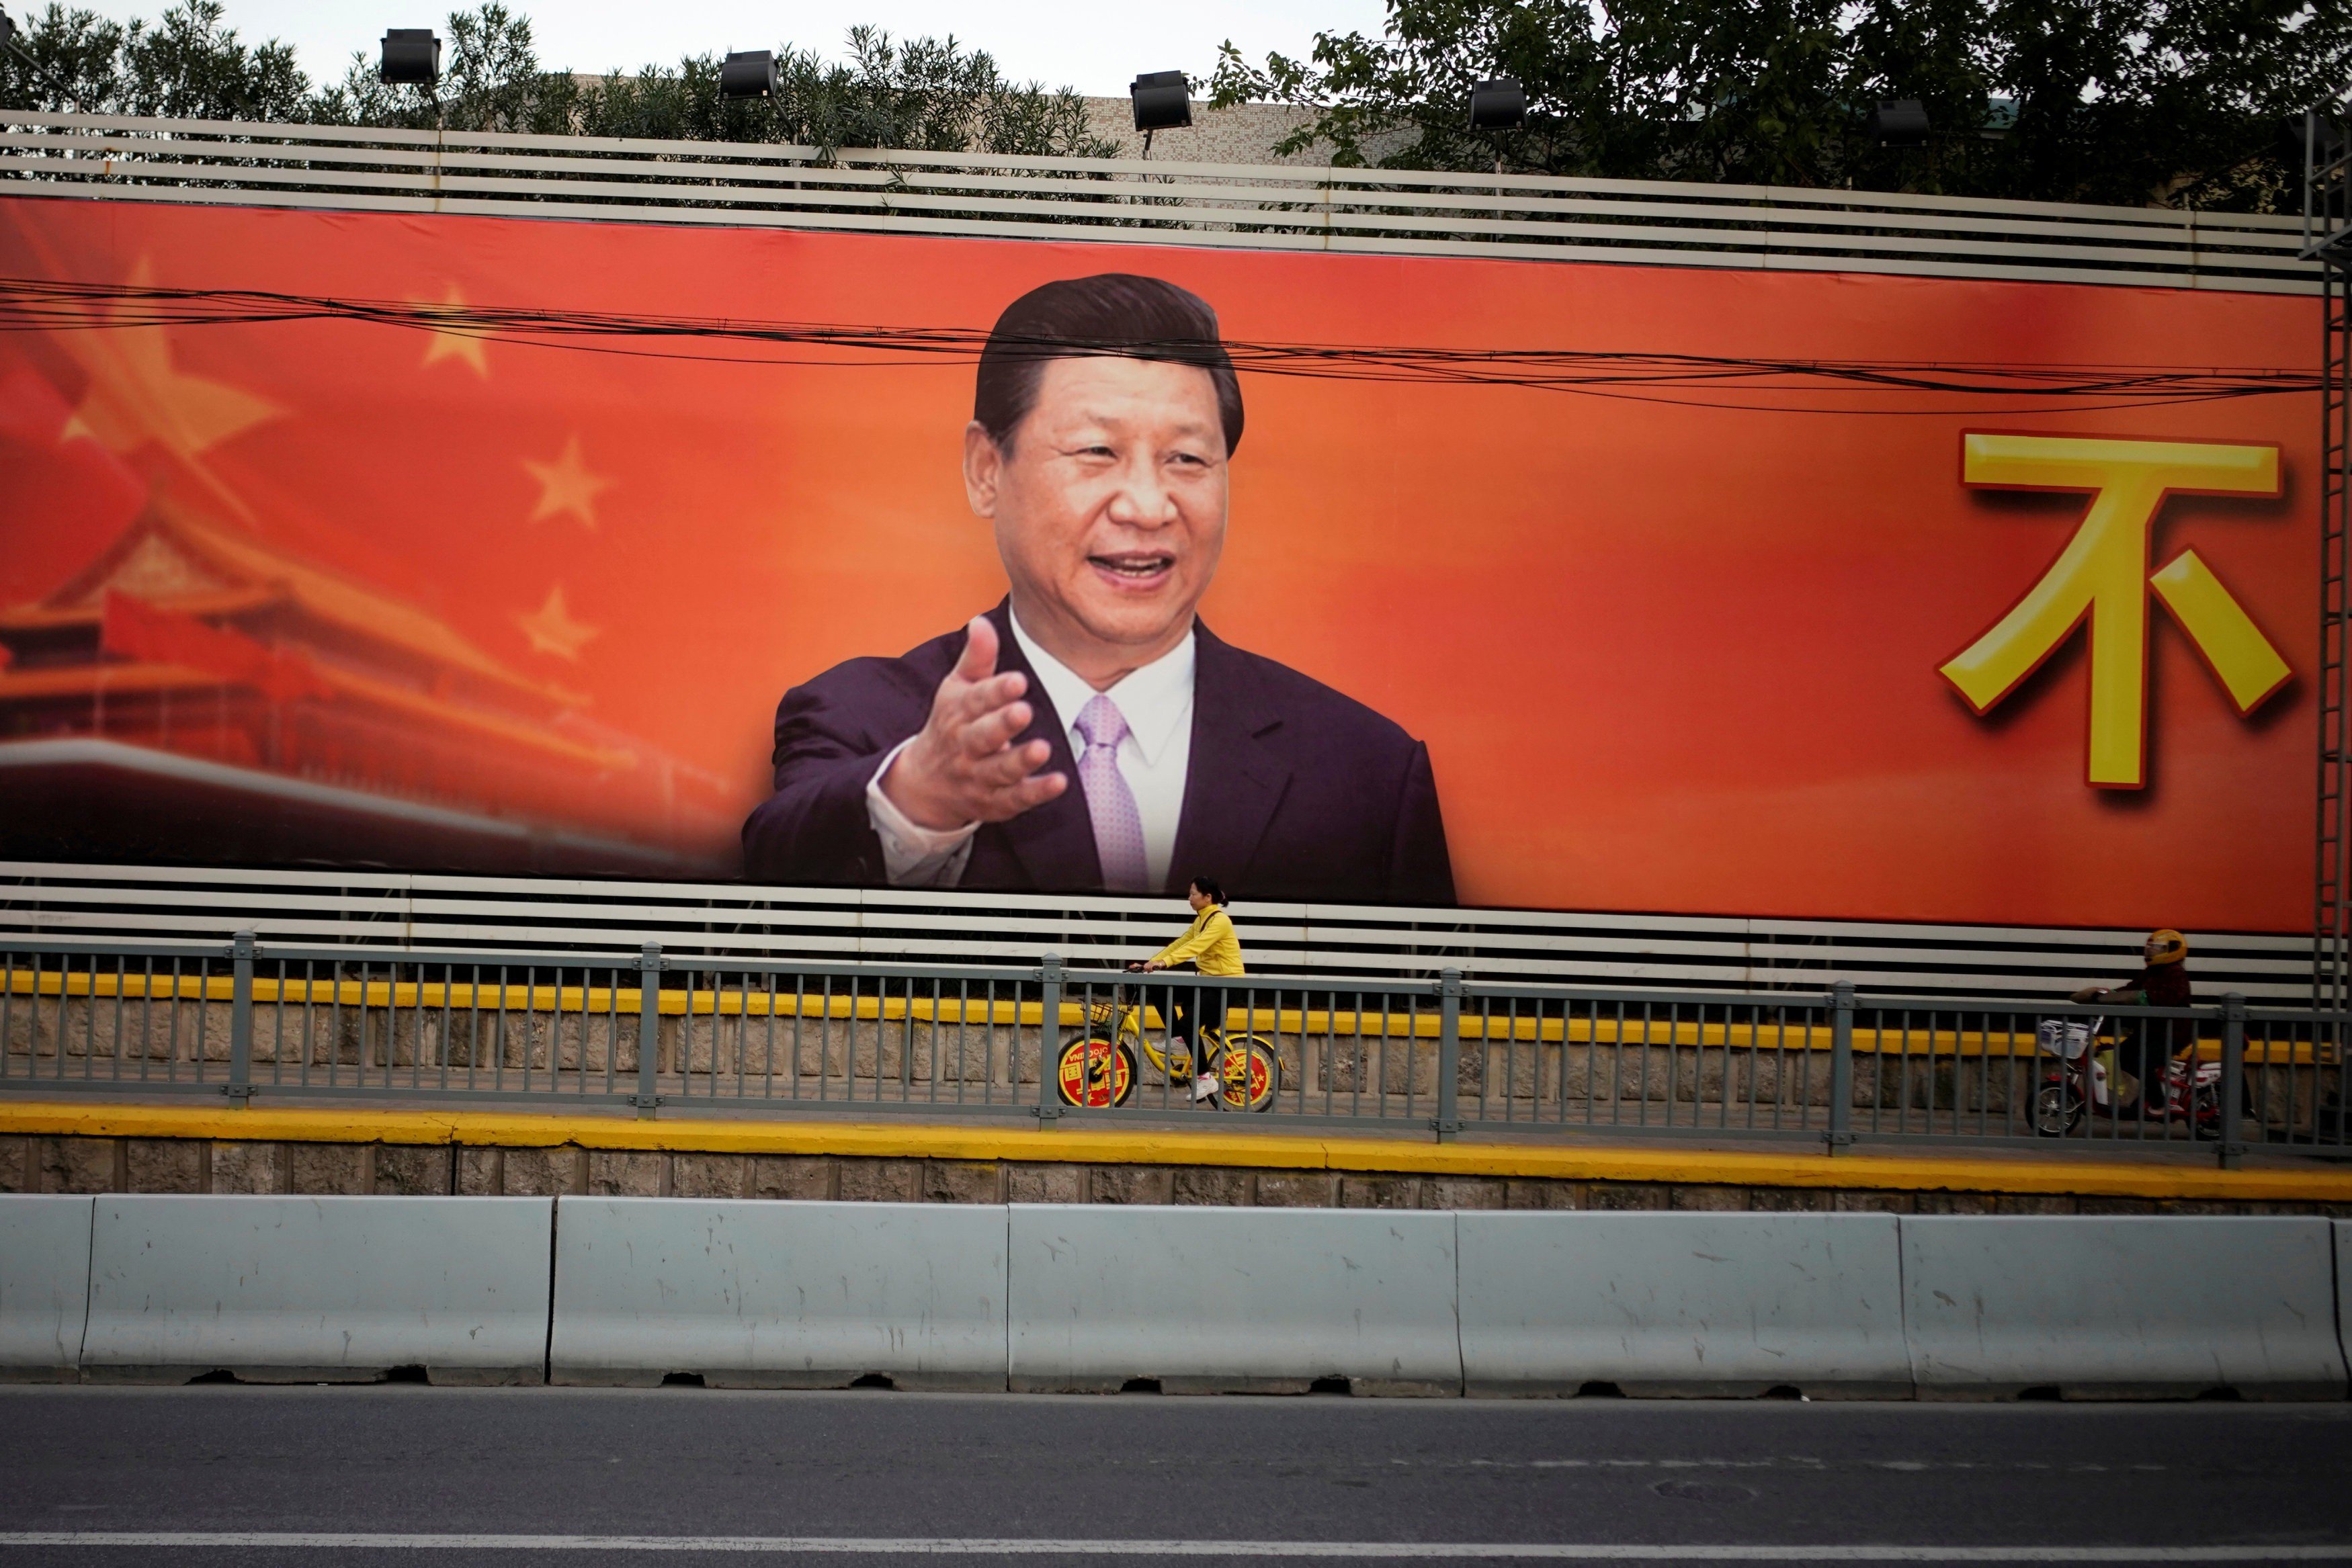 A poster with a portrait of President Xi Jinping is displayed along a street in Shanghai, on October 24. A political system that is highly centralised, ideologically driven, under one charismatic, almost all-powerful leader, with striking ambitions of global military grandeur and influence, carries its own dangers. Photo: Reuters